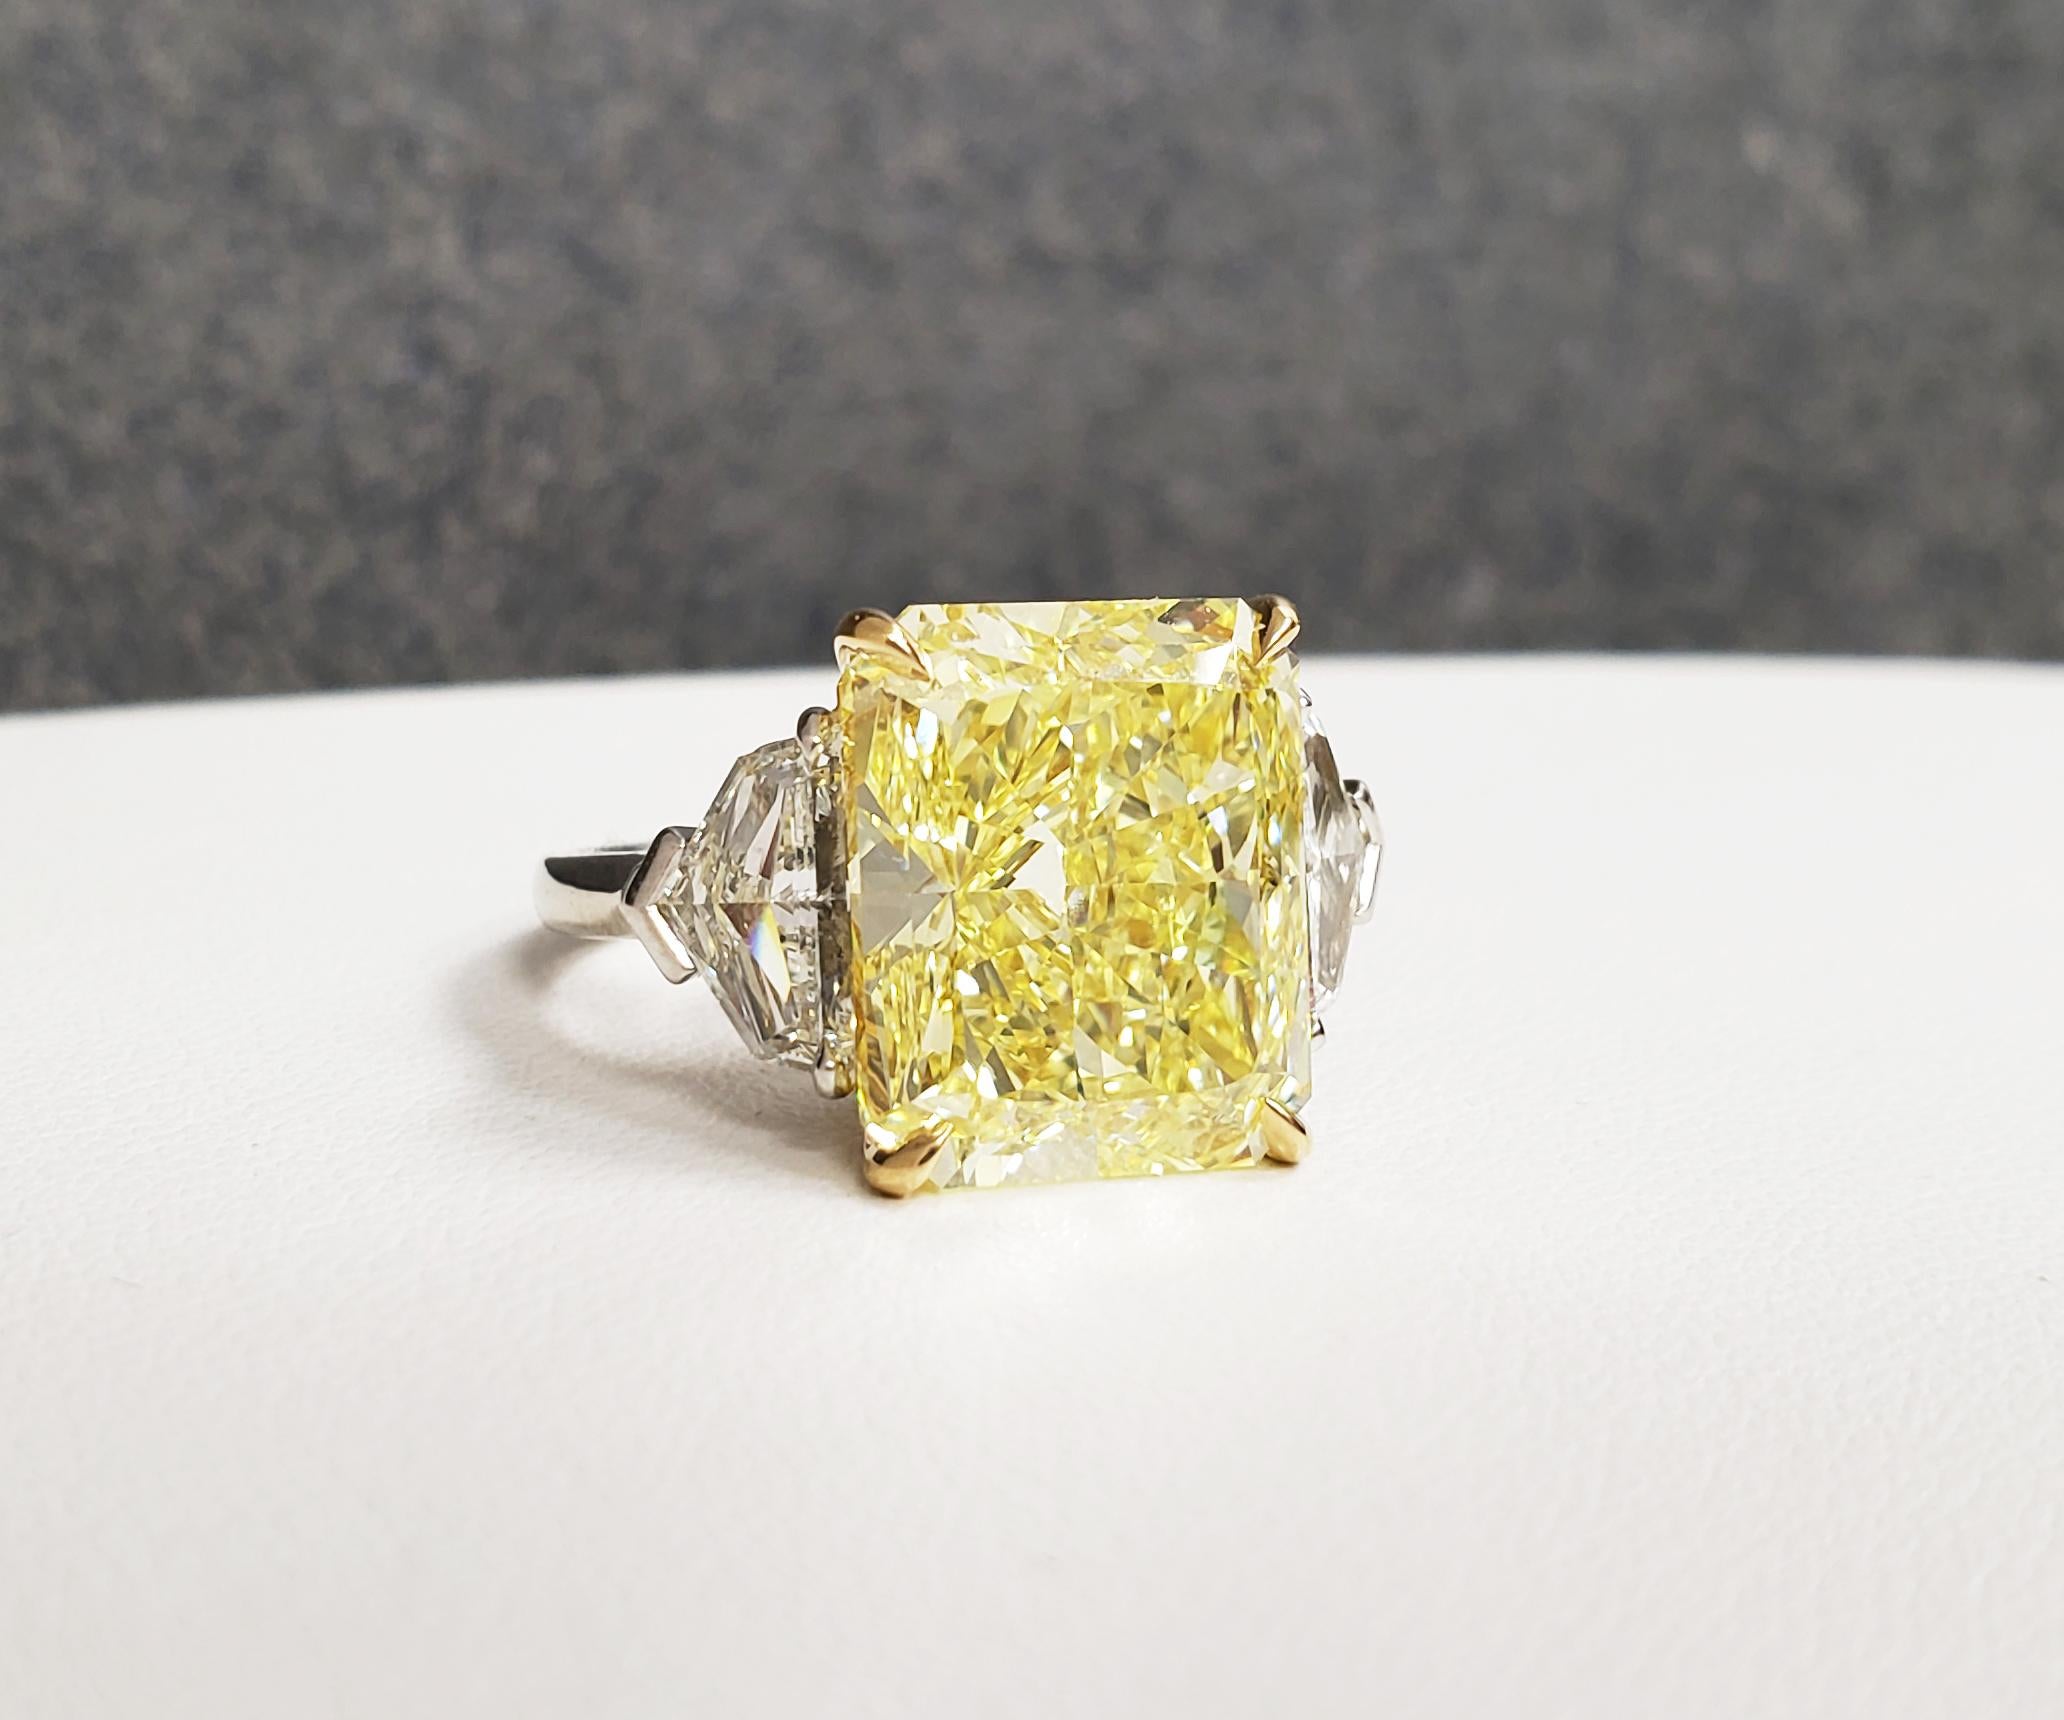 From SCARSELLI this Natural Fancy Intense Yellow  Radiant diamond of 10.02 carats, VVS1 clarity certified by GIA set with a pair of white side diamonds, cadillac cut, total weight 1.25 in a Platinum and 18k yellow gold ring. Inquiries are